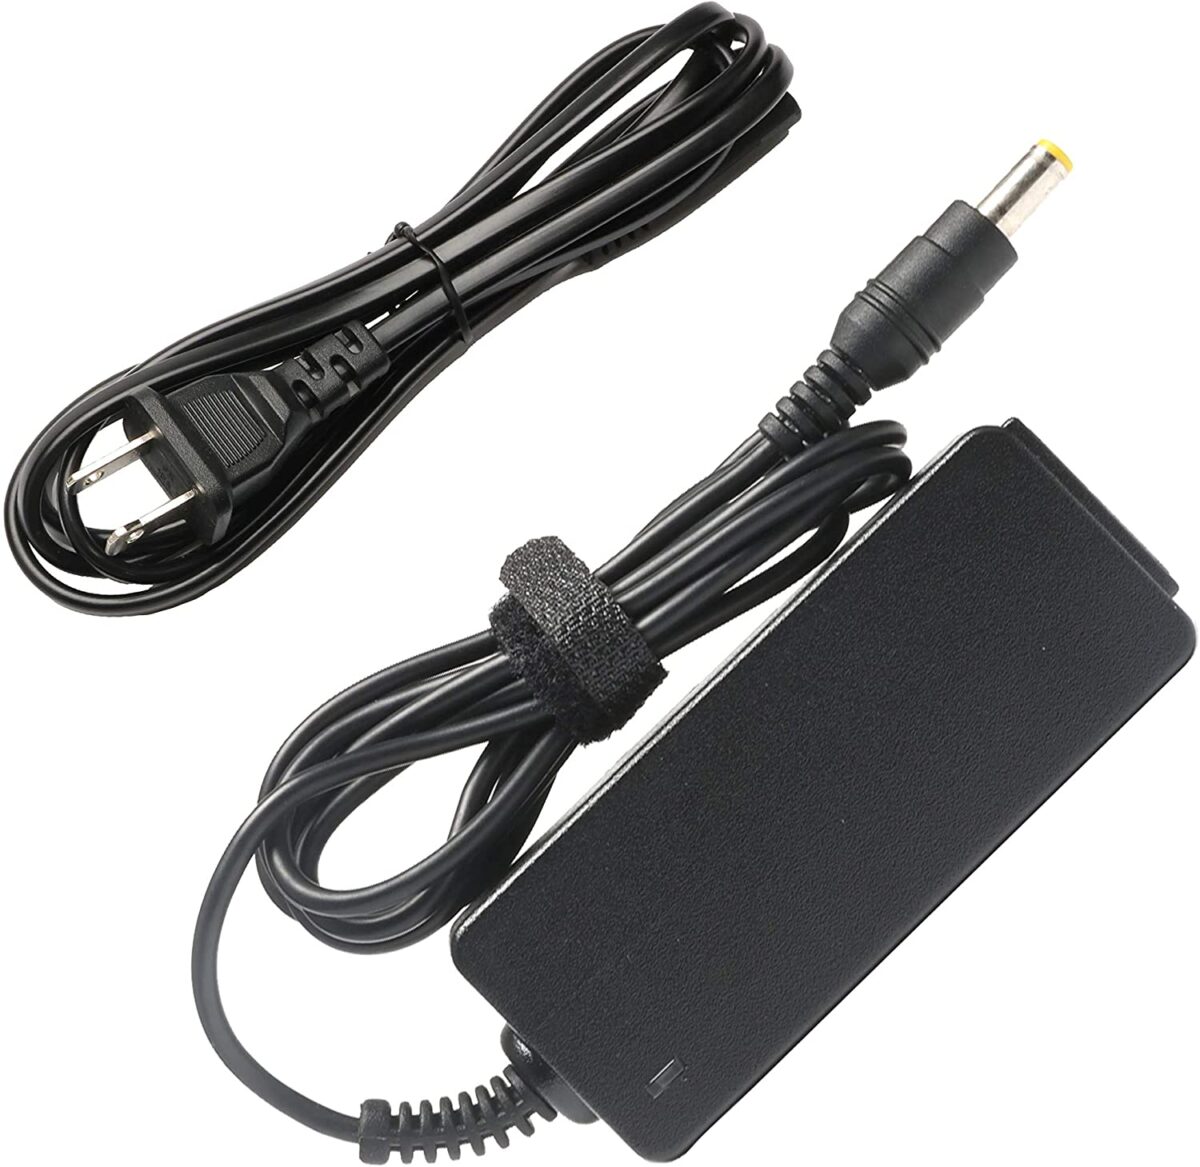 Dell Inspiron Mini charger